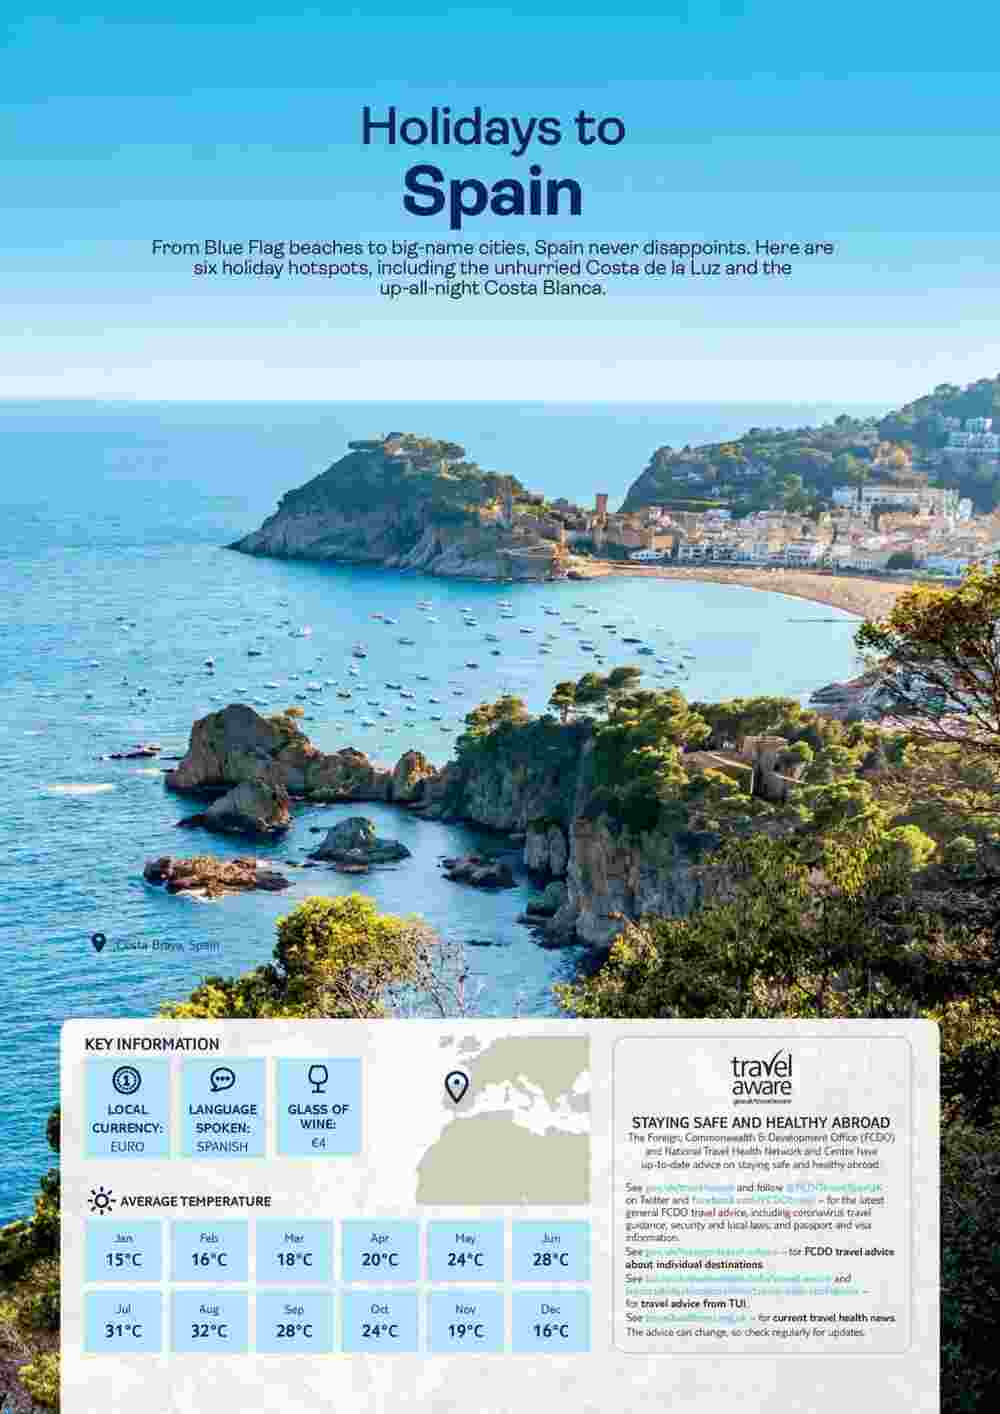 Tui offers valid from 10/11/2023 - Page 42.